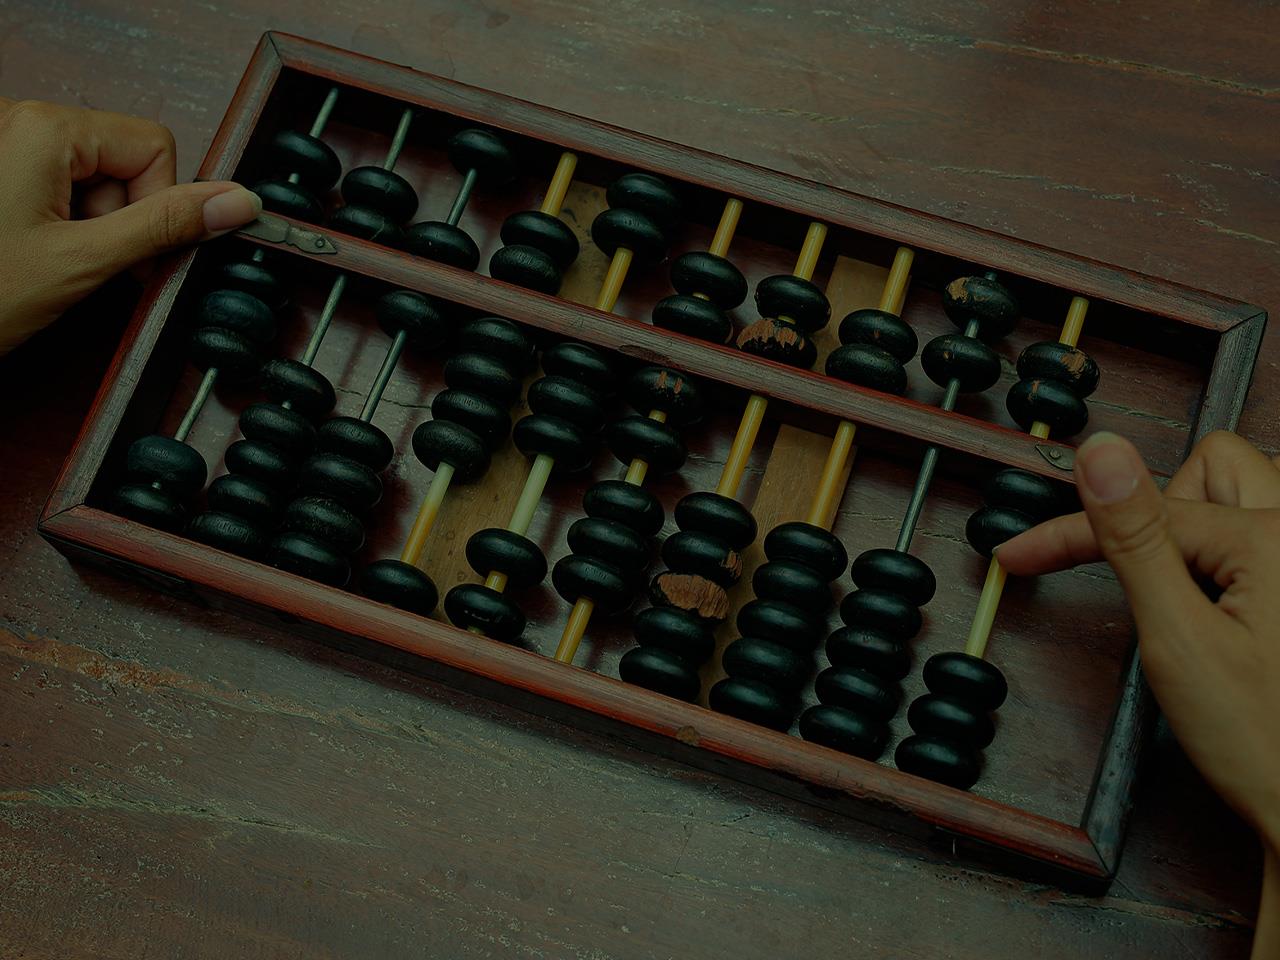 wooden abacus history